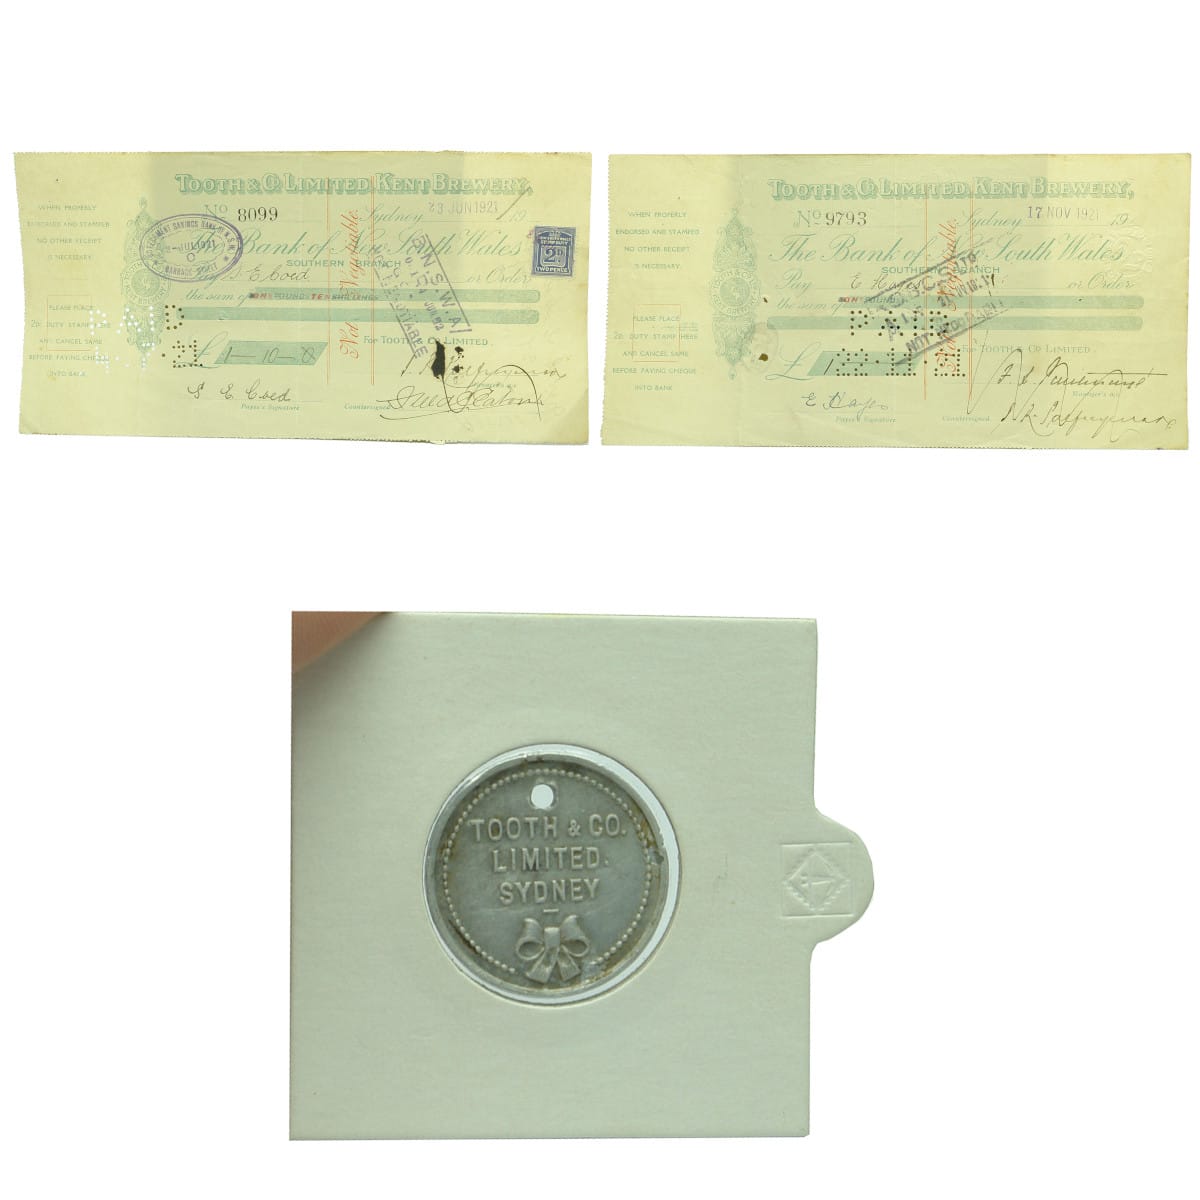 3 Items: Receipts. Tooth & Co Limited Kent Brewery. Dated 2/7/1921 & 17/11/1921. Token/Checkpiece. Tooth & Co Limited Sydney. (Blue Bow). 2 /- Deposit. (Sydney, New South Wales)